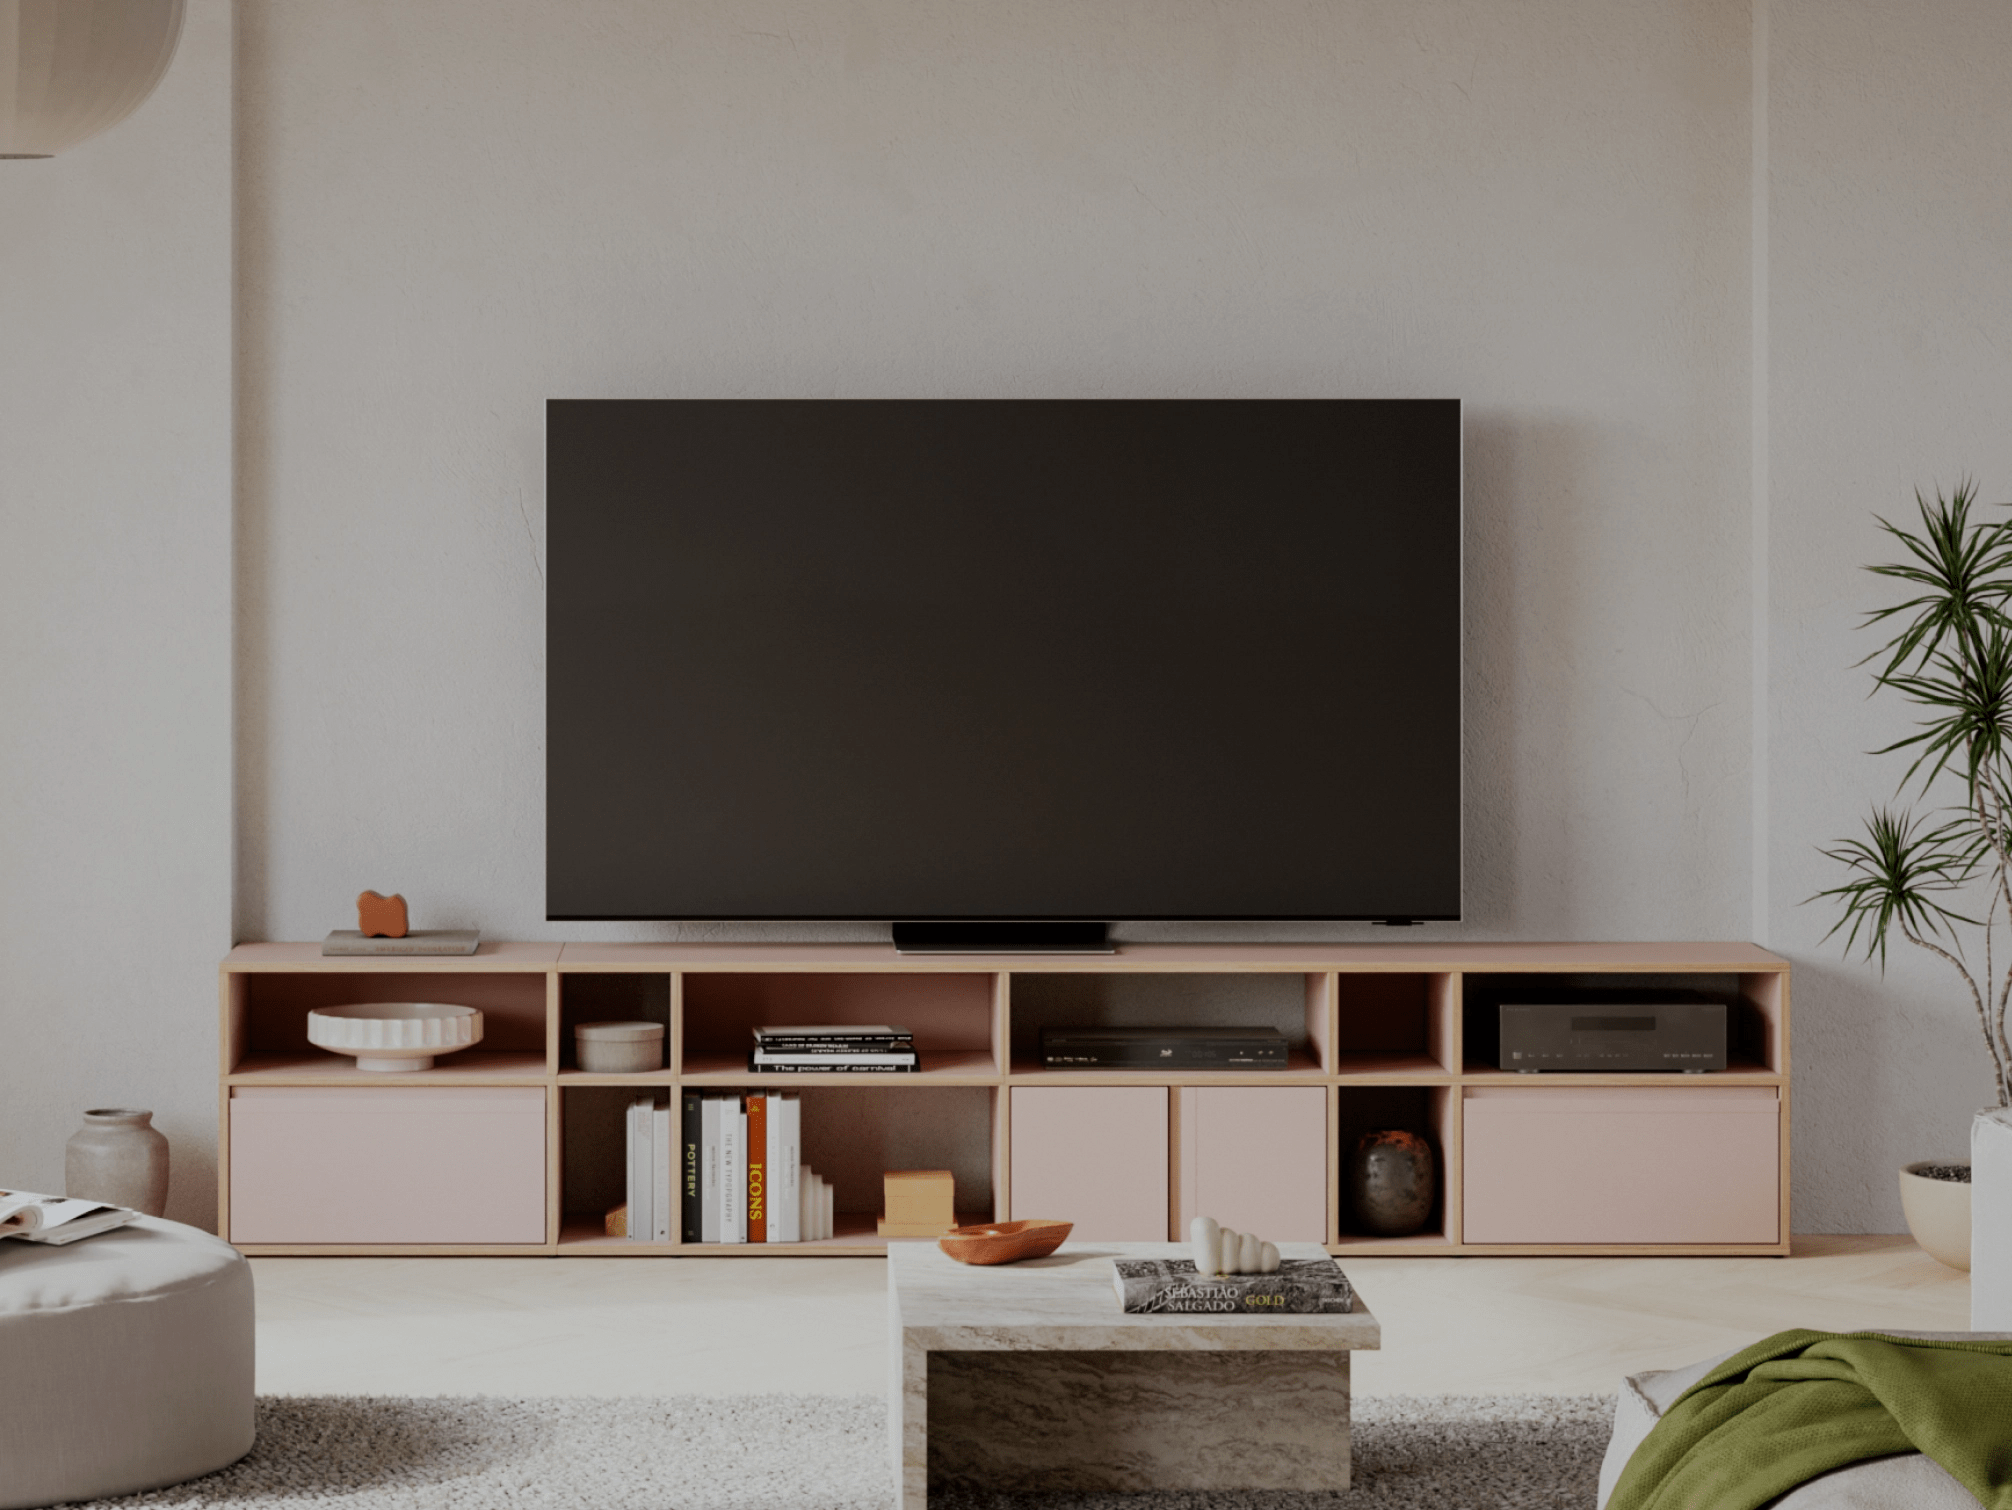 Deep Dusty Pink Plywood Tv Stand with Drawers and Cable Management plywood - 190x53x40cm 1